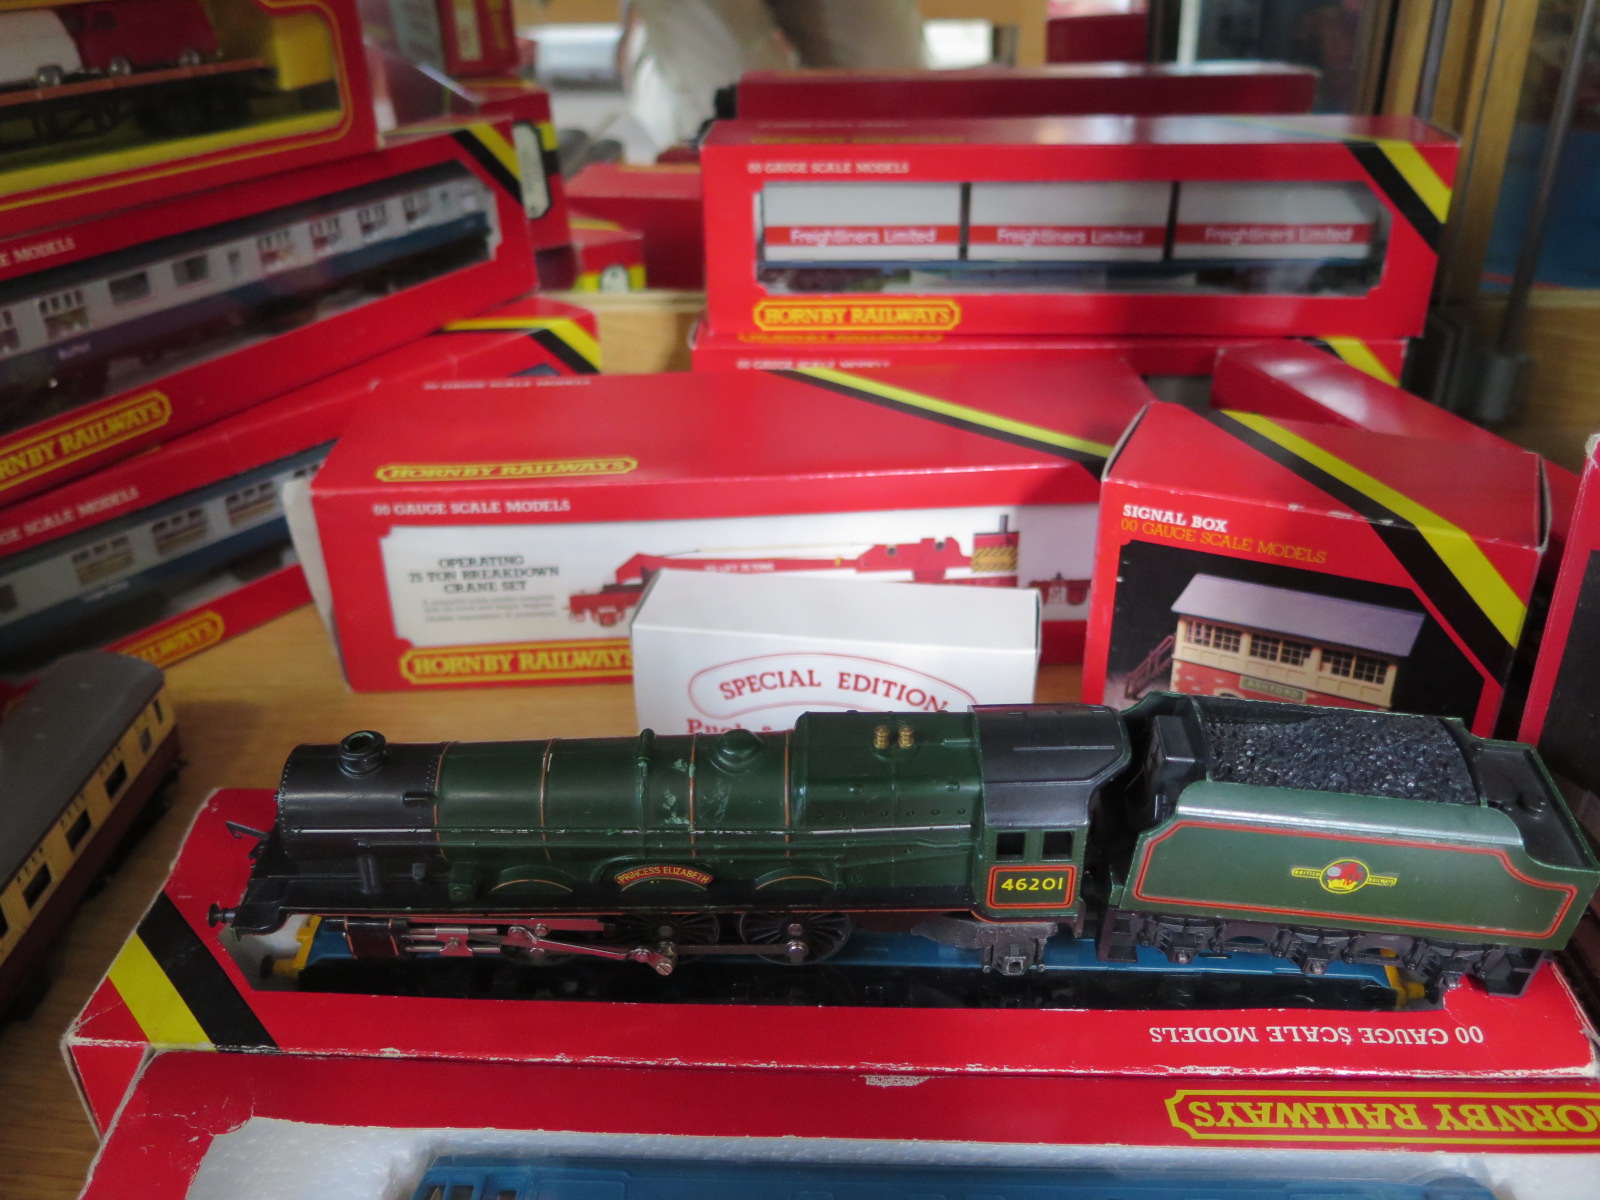 A Hornby 00 gauge train BR Express Freight set boxed with four additional engines, rolling stock and - Image 4 of 6